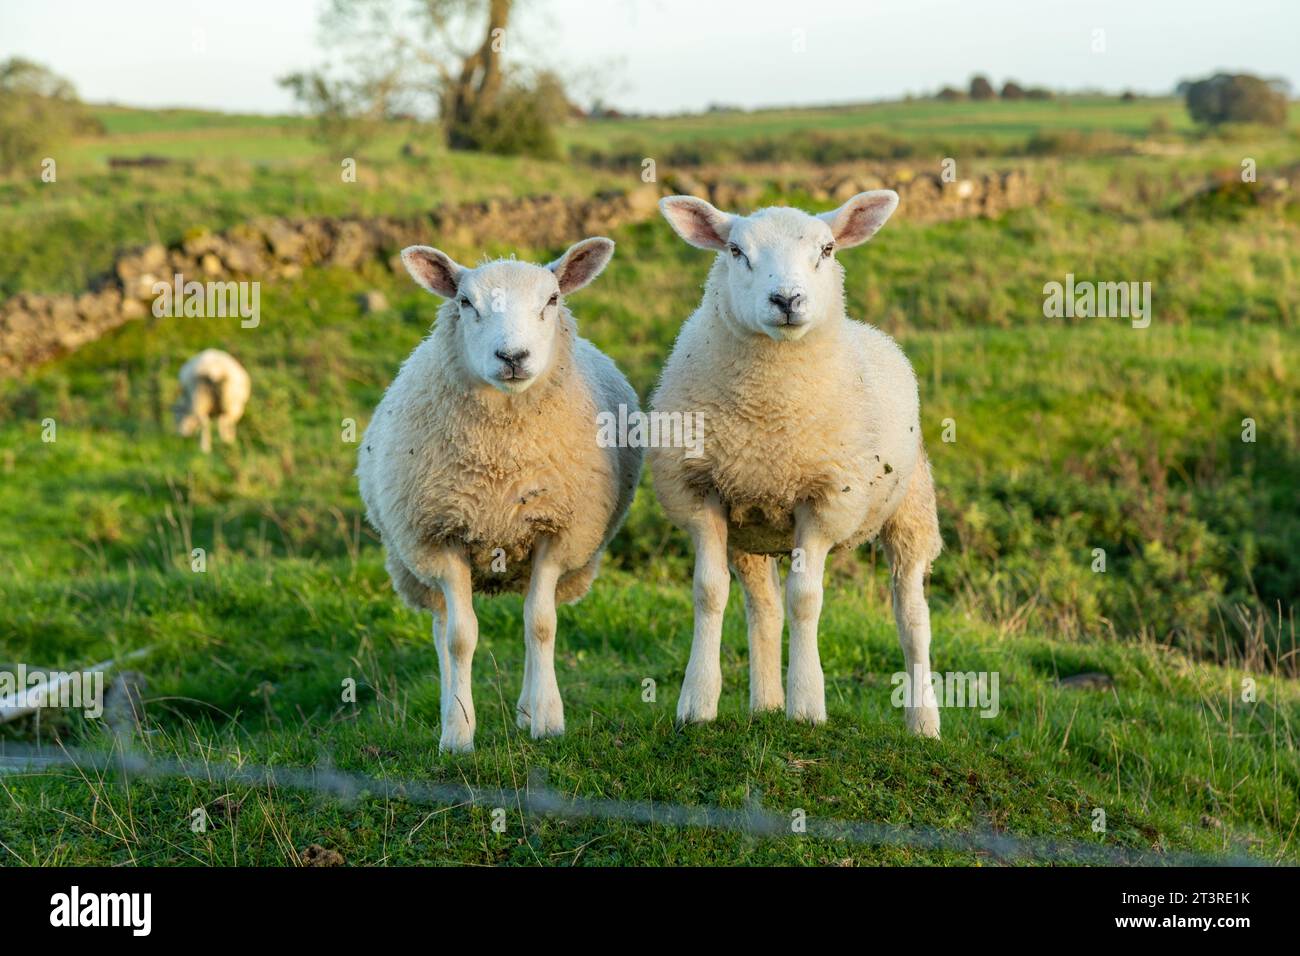 Two sheep standing side by side looking to camera Stock Photo